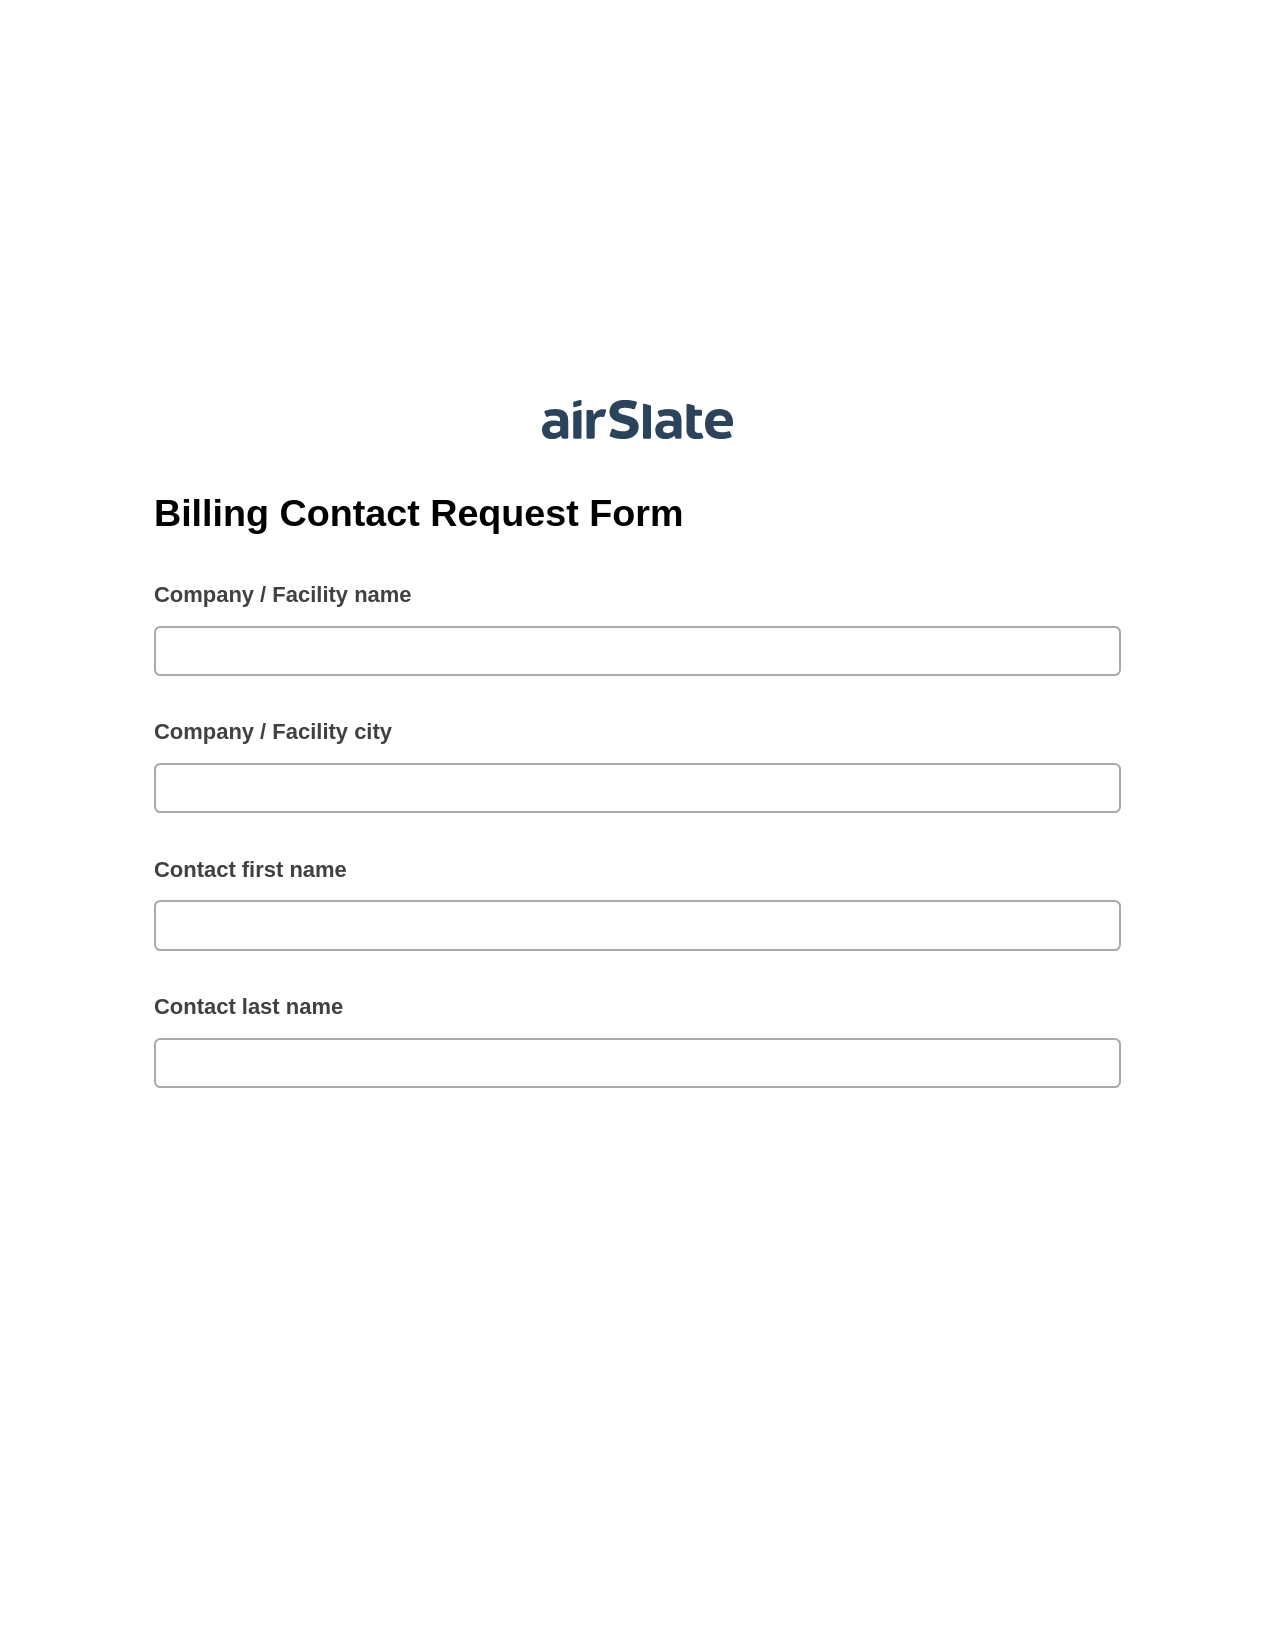 Multirole Billing Contact Request Form Pre-fill from CSV File Bot, Send Mailchimp Campaign Bot, Export to NetSuite Record Bot